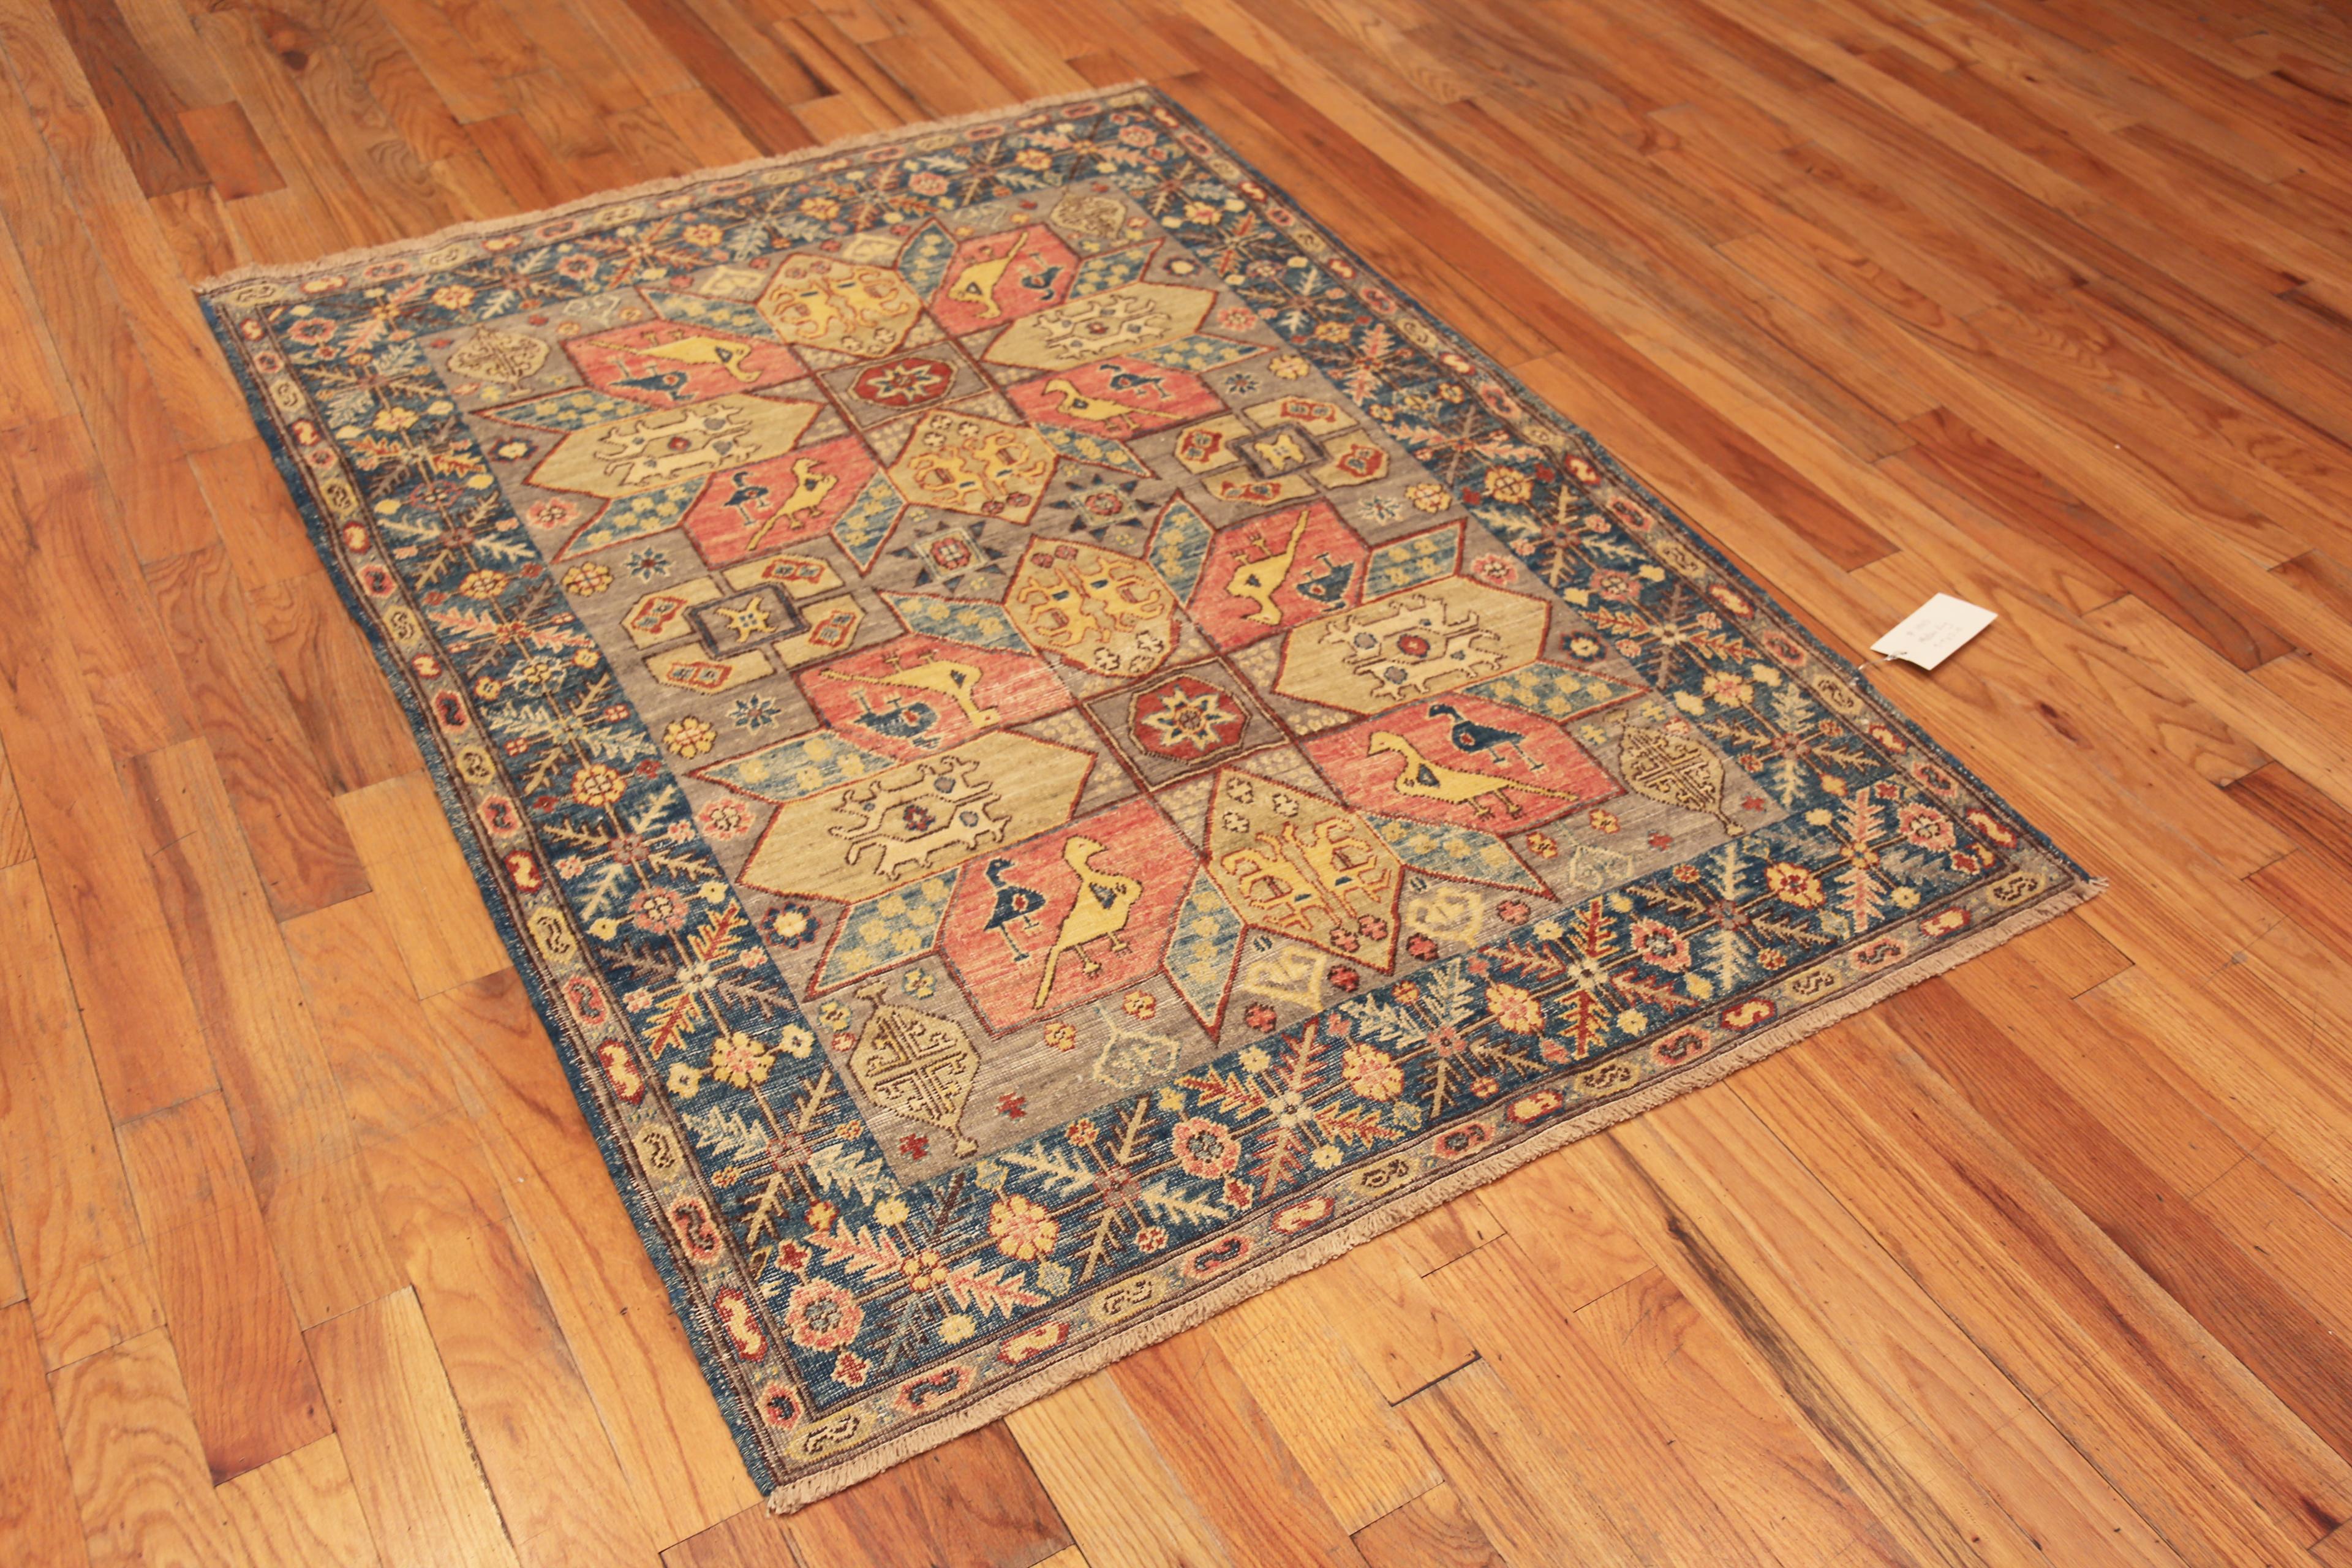 A Beautifully Artistic Small Size Rustic Color Tribal Geometric Animal Design Modern Area Rug, Country Of Origin: Central Asia, Circa Date: Modern Rug 